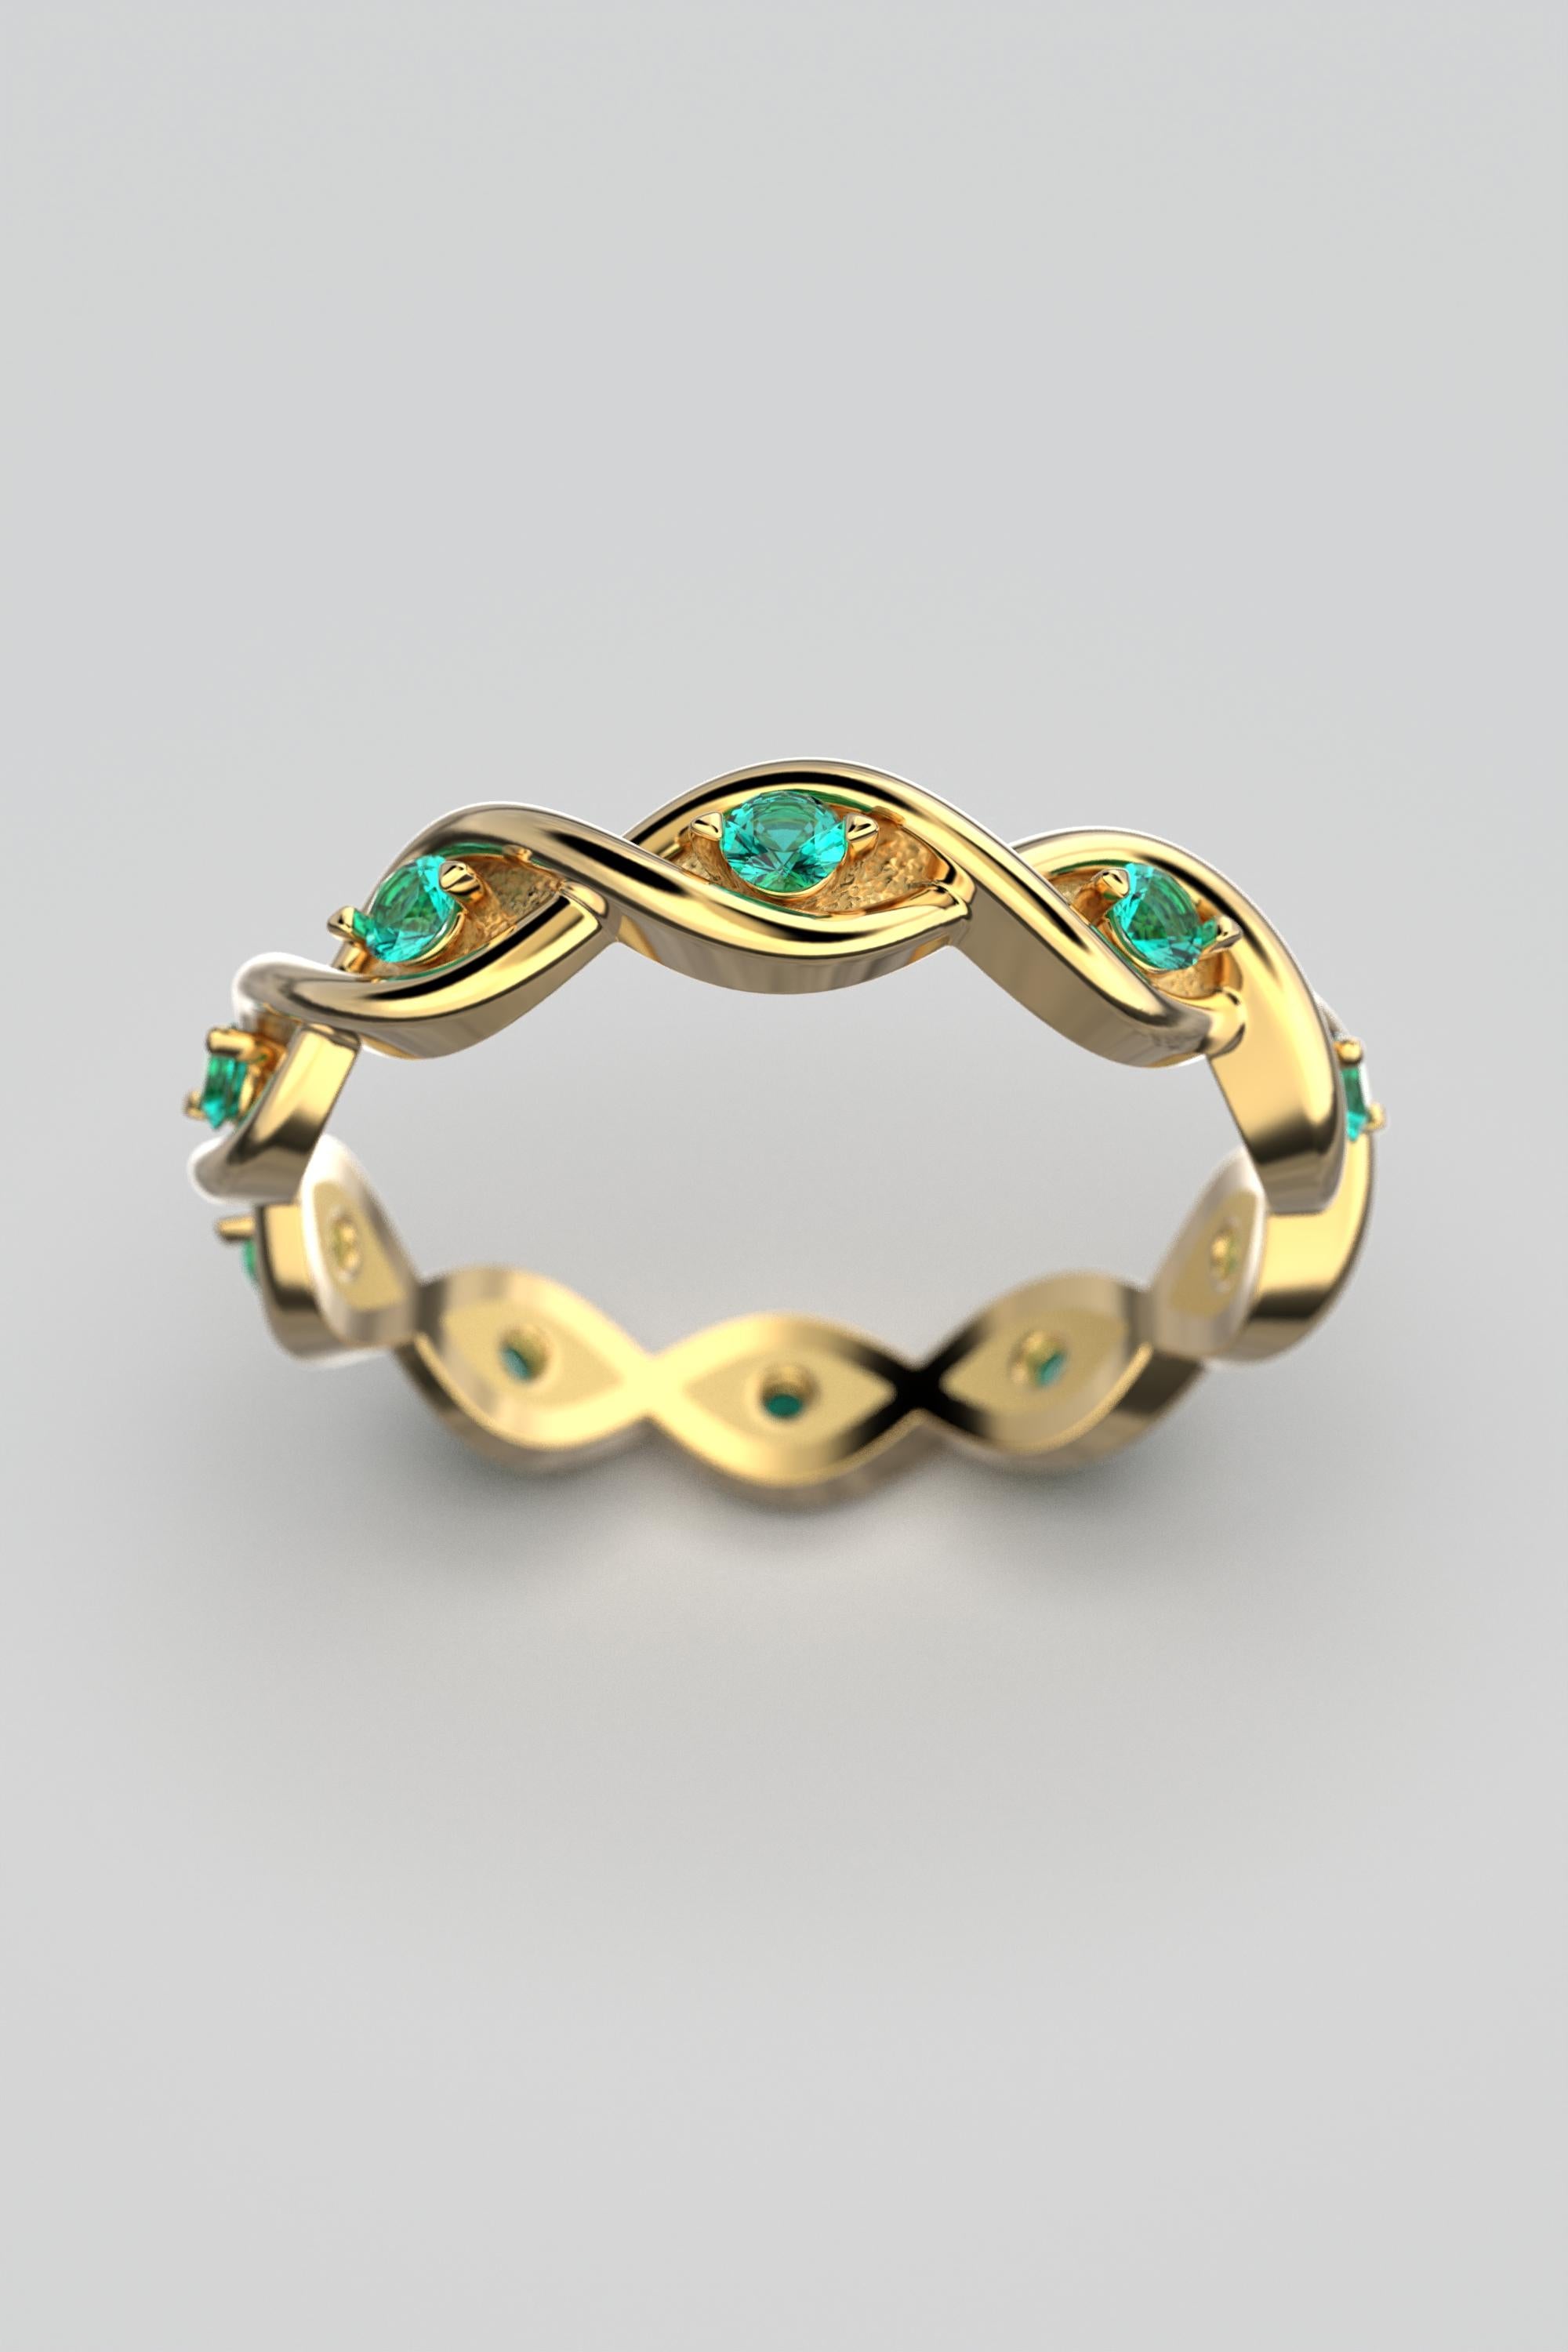 For Sale:  Eternity Emerald Gold Band Made in Italy By Oltremare Gioielli  18K Solid Gold 2